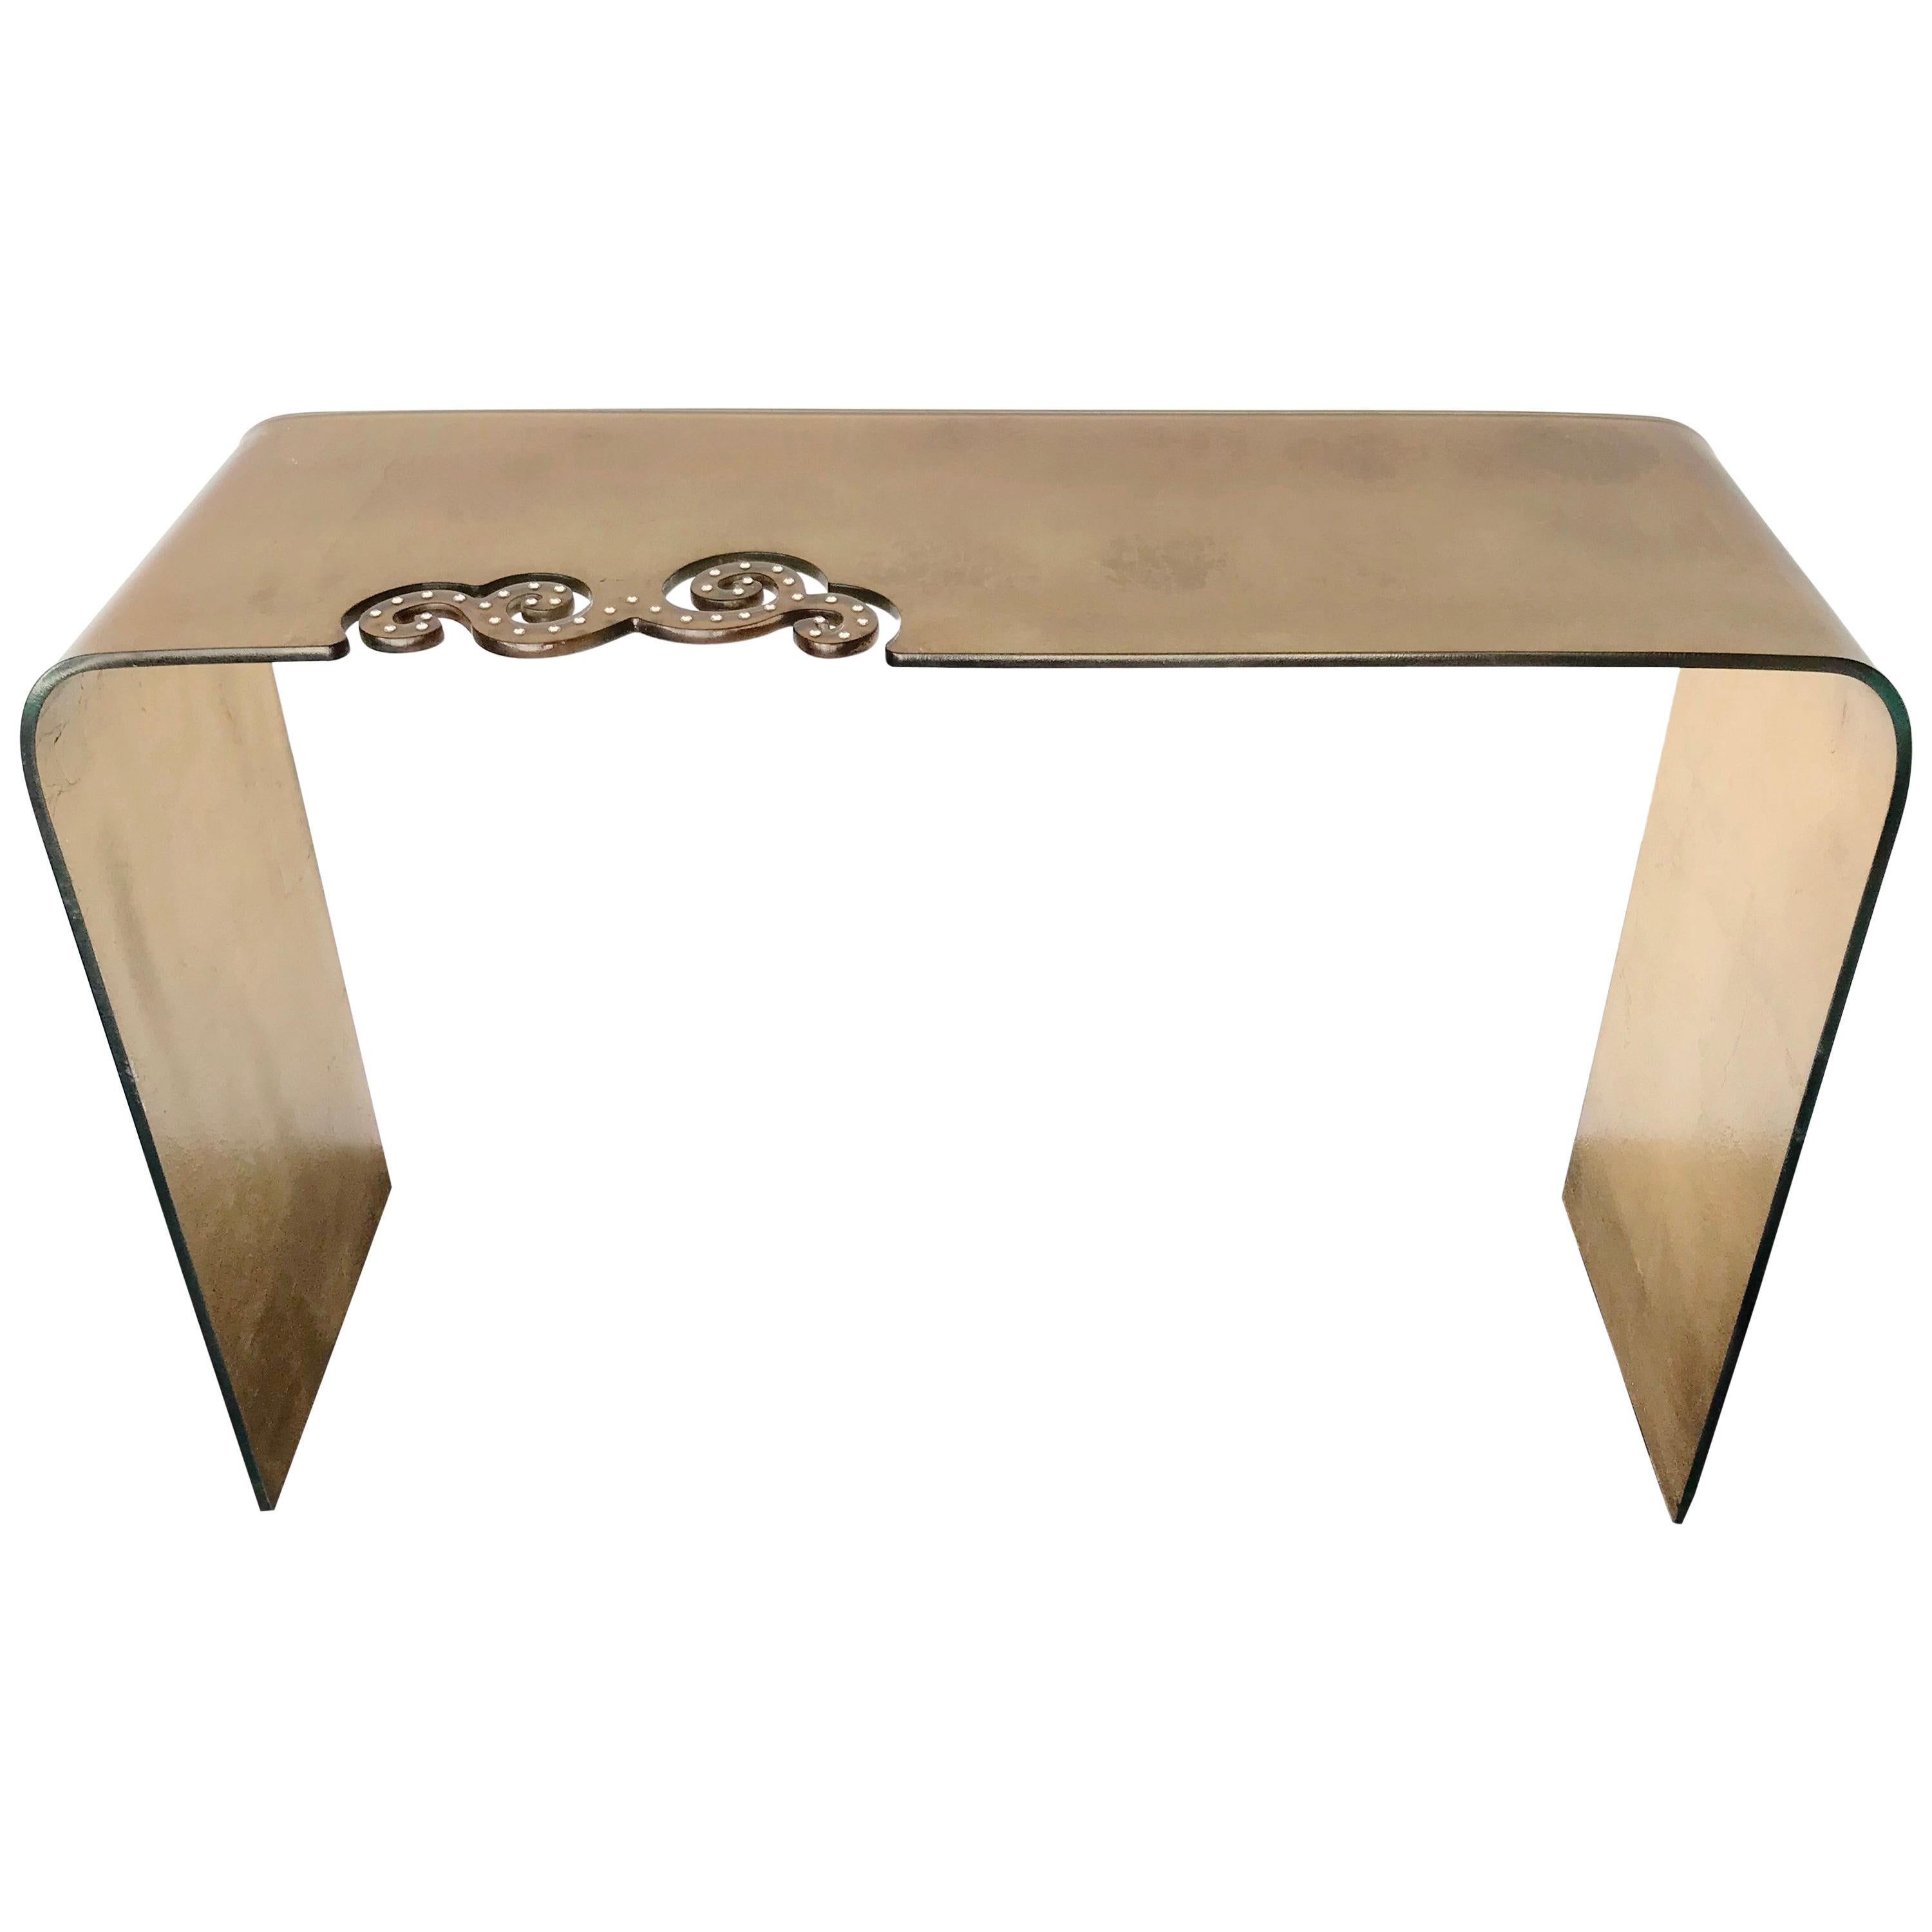 Italian Gold Glass Console Table with Swarovski Crystals FINAL CLEARANCE SALE